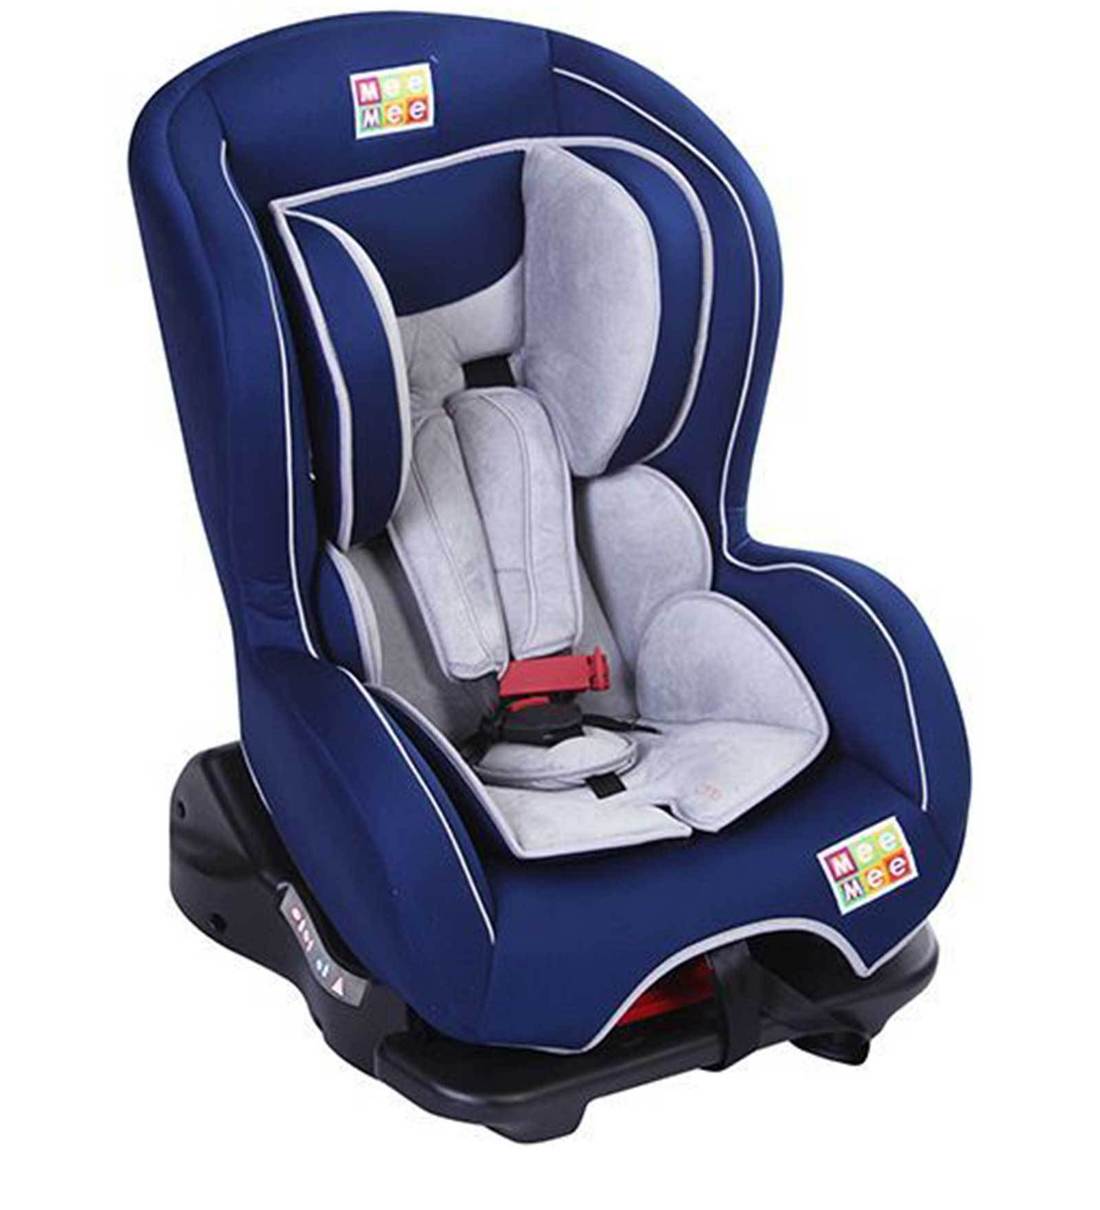 All About Mee Mee Grow With Me Car Seat